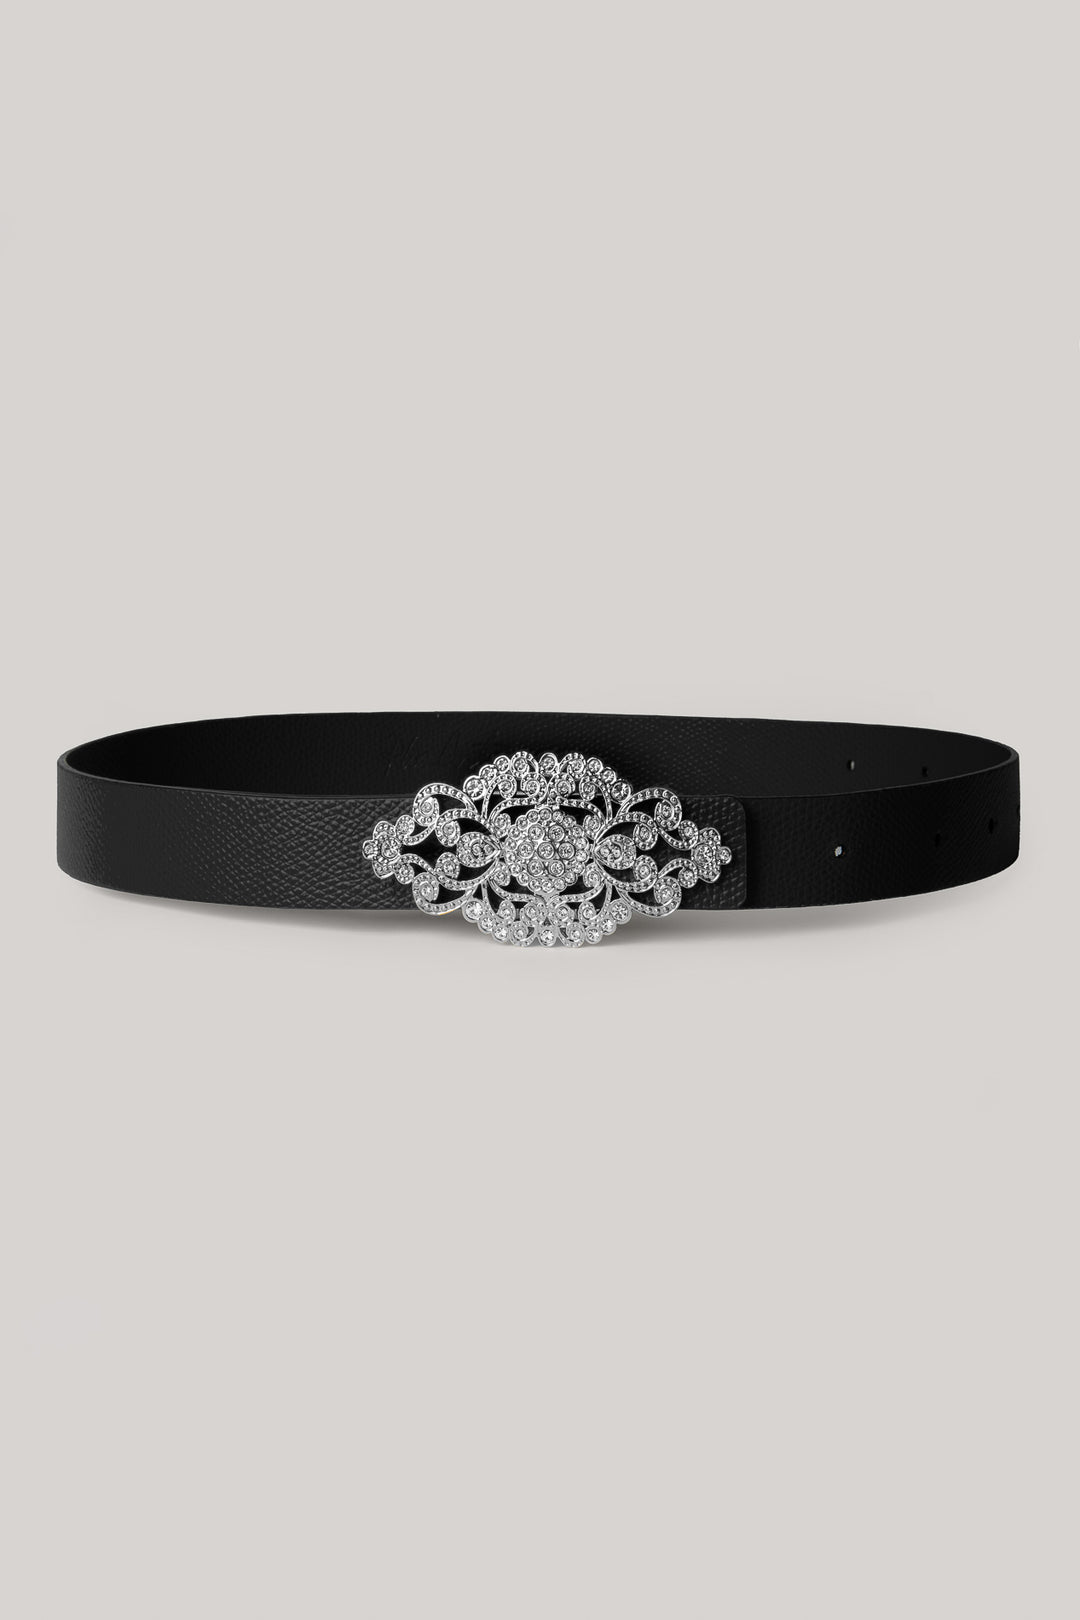 Saffiano Black Leather Waist Belt With Silver Baroque Buckle